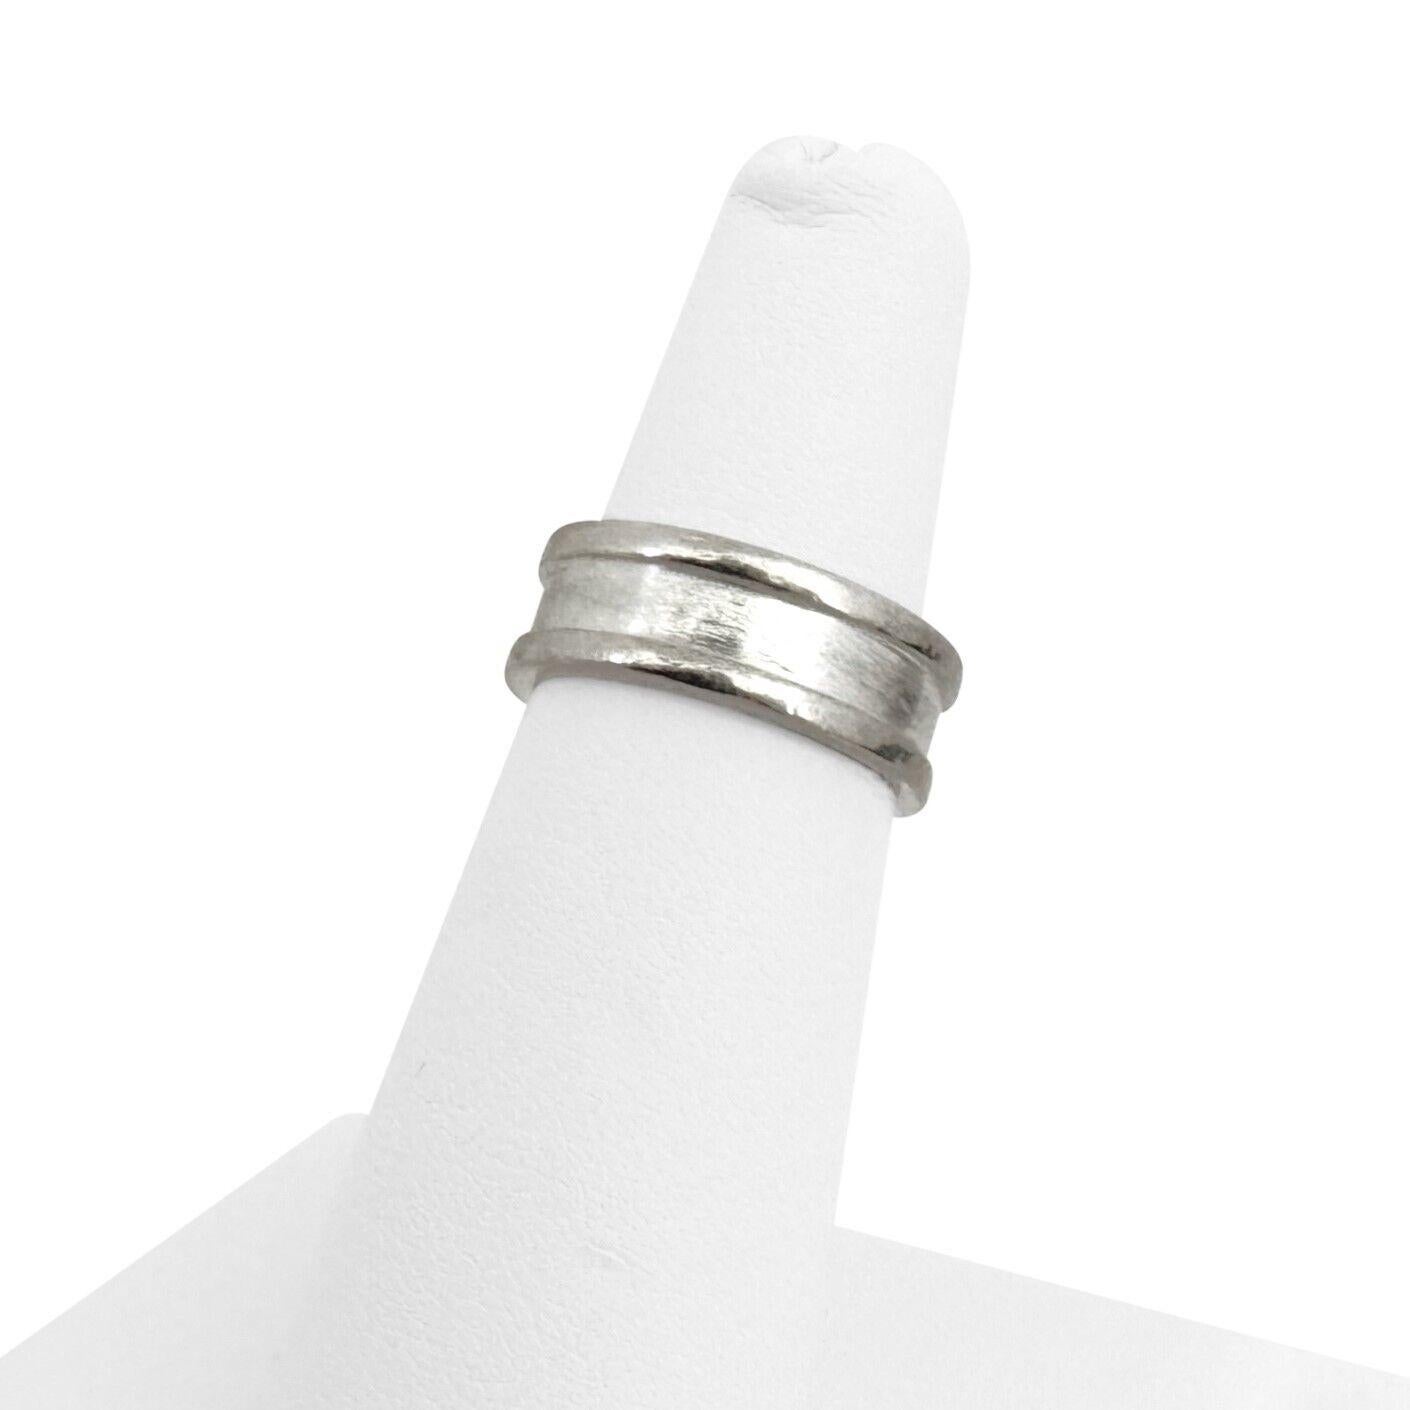 Cartier 18k White Gold C de Cartier Band Ring Size 4.75

Condition:  Excellent Condition, Professionally Cleaned and Polished
Metal:  18k Gold (Marked, and Professionally Tested)
Weight:  7.1g
Width:  6mm
Size	:  49 (US Size 4.75)
Markings:  